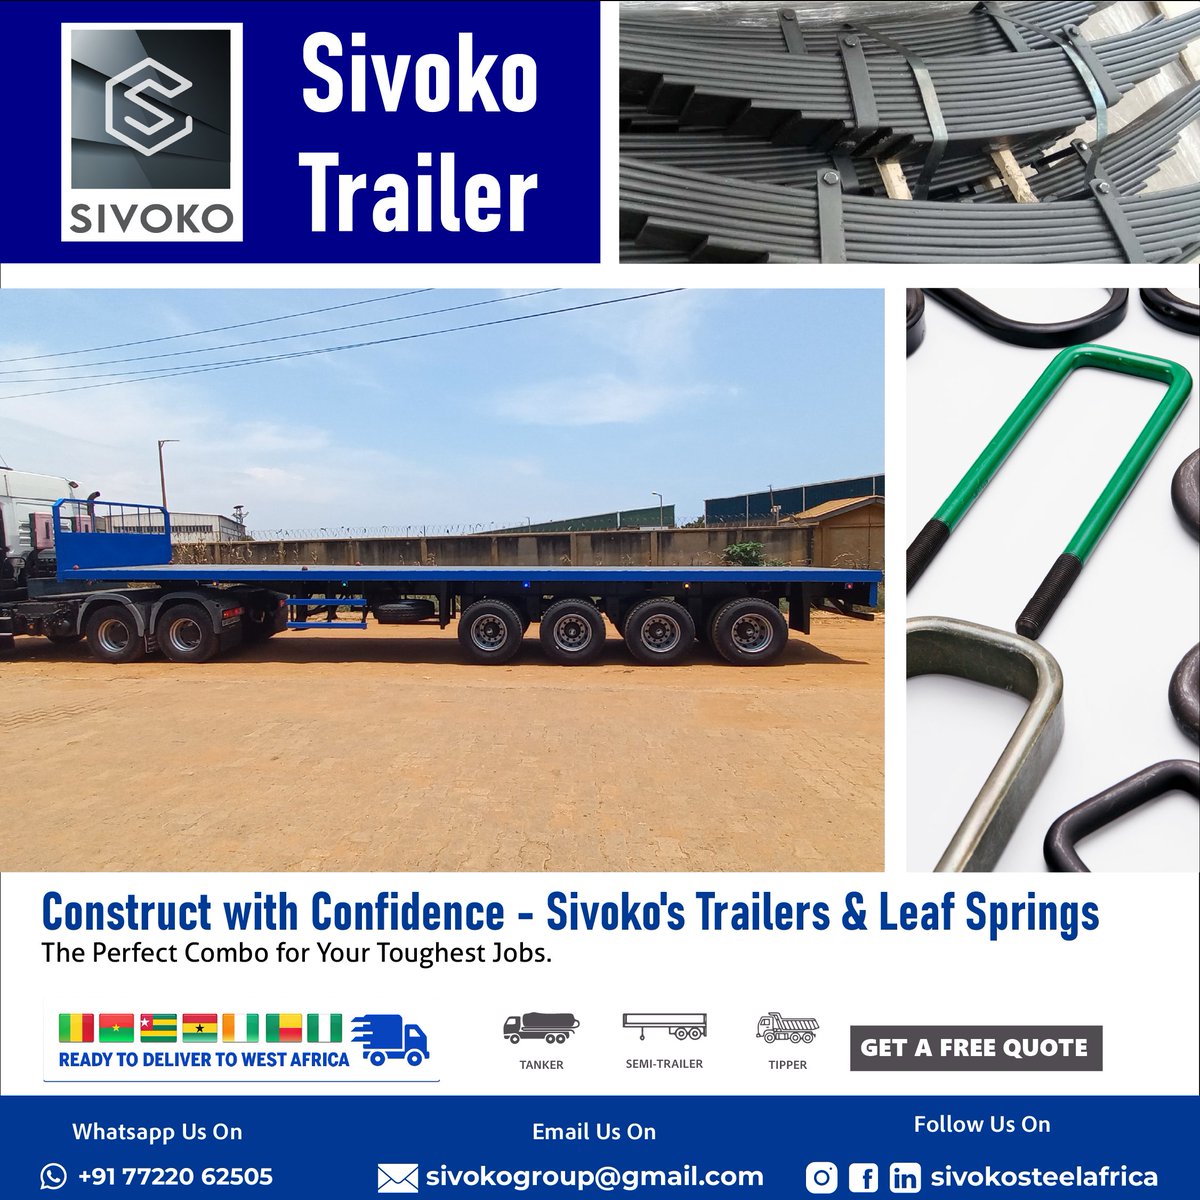 Sivoko Trailers and Leaf Springs - Unleashing Your Journey with Unyielding Confidence.

Whatsapp us: +917722062505
Email us: Sivokogroup@gmail.com

#sivokoflatbedtrailers #transportationsolutions #heavydutyhauling #reliabletransport